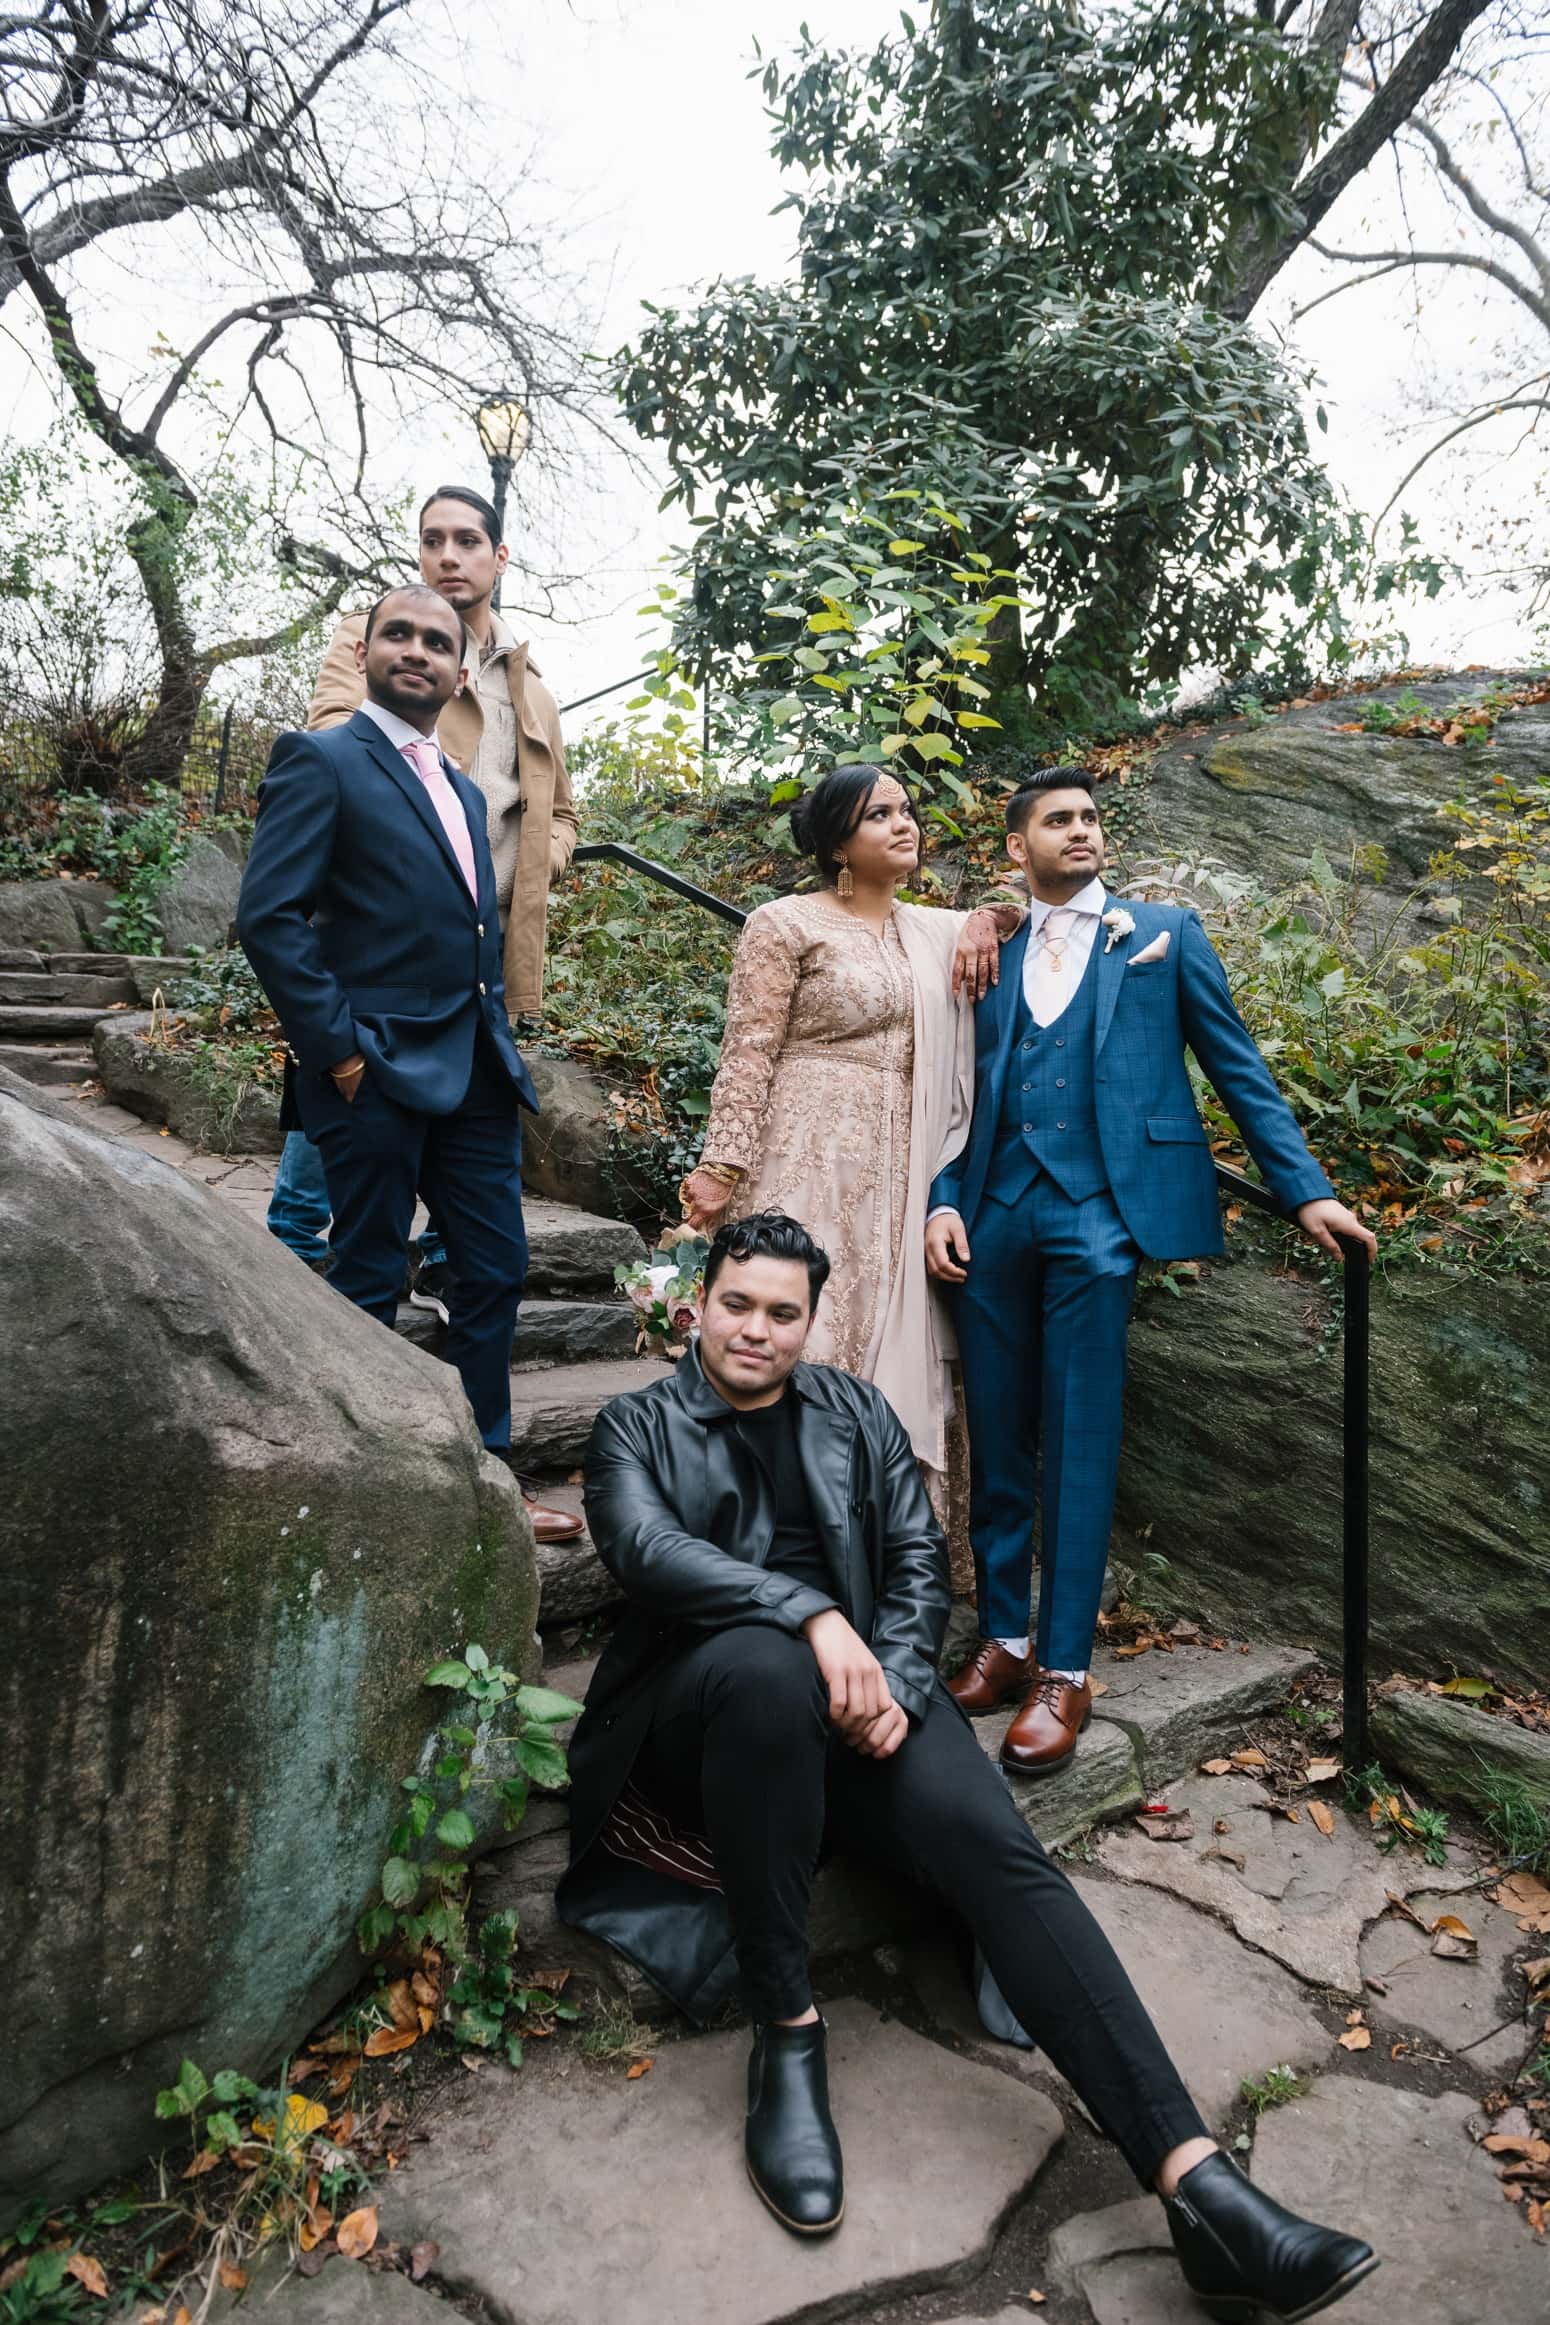 Wagner Cove wedding in Central Park NYC. Photos by NYC elopement photographer Everly Studios